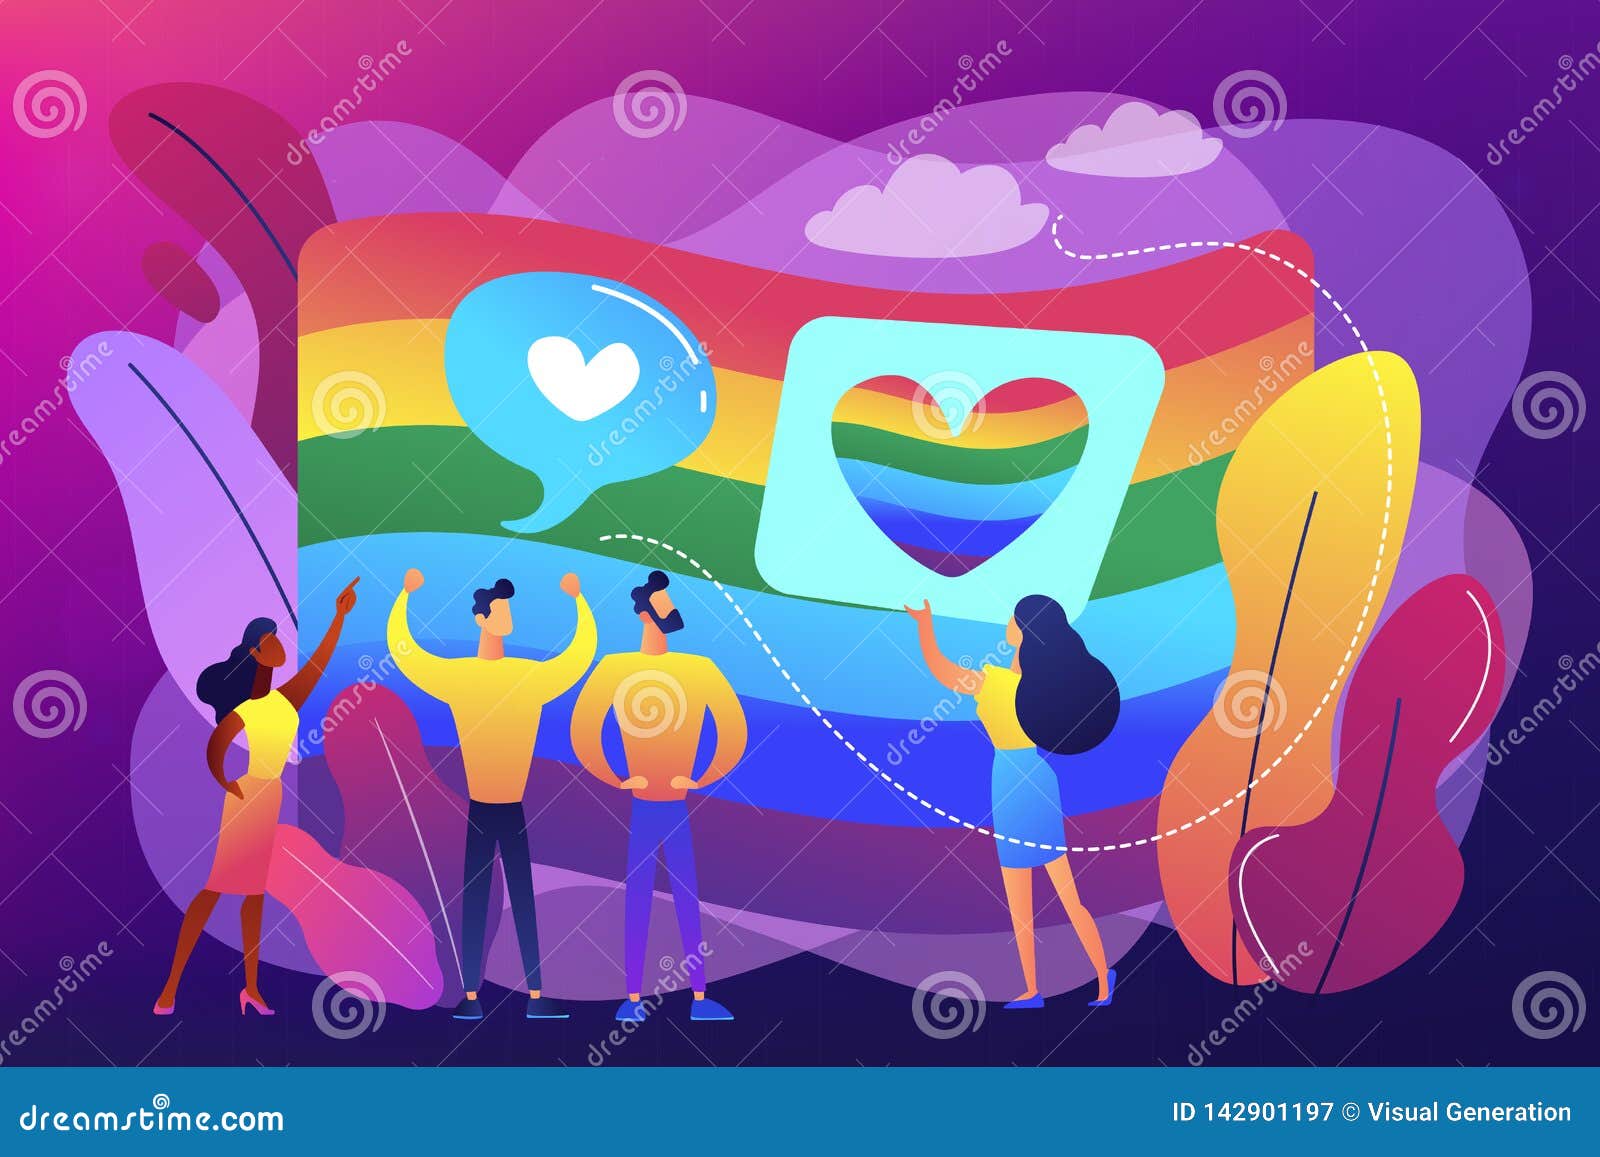 https://thumbs.dreamstime.com/z/rainbow-coloured-flag-lgbt-community-demonstration-hearts-sexuality-gender-identity-sexual-orientation-movement-concept-142901197.jpg